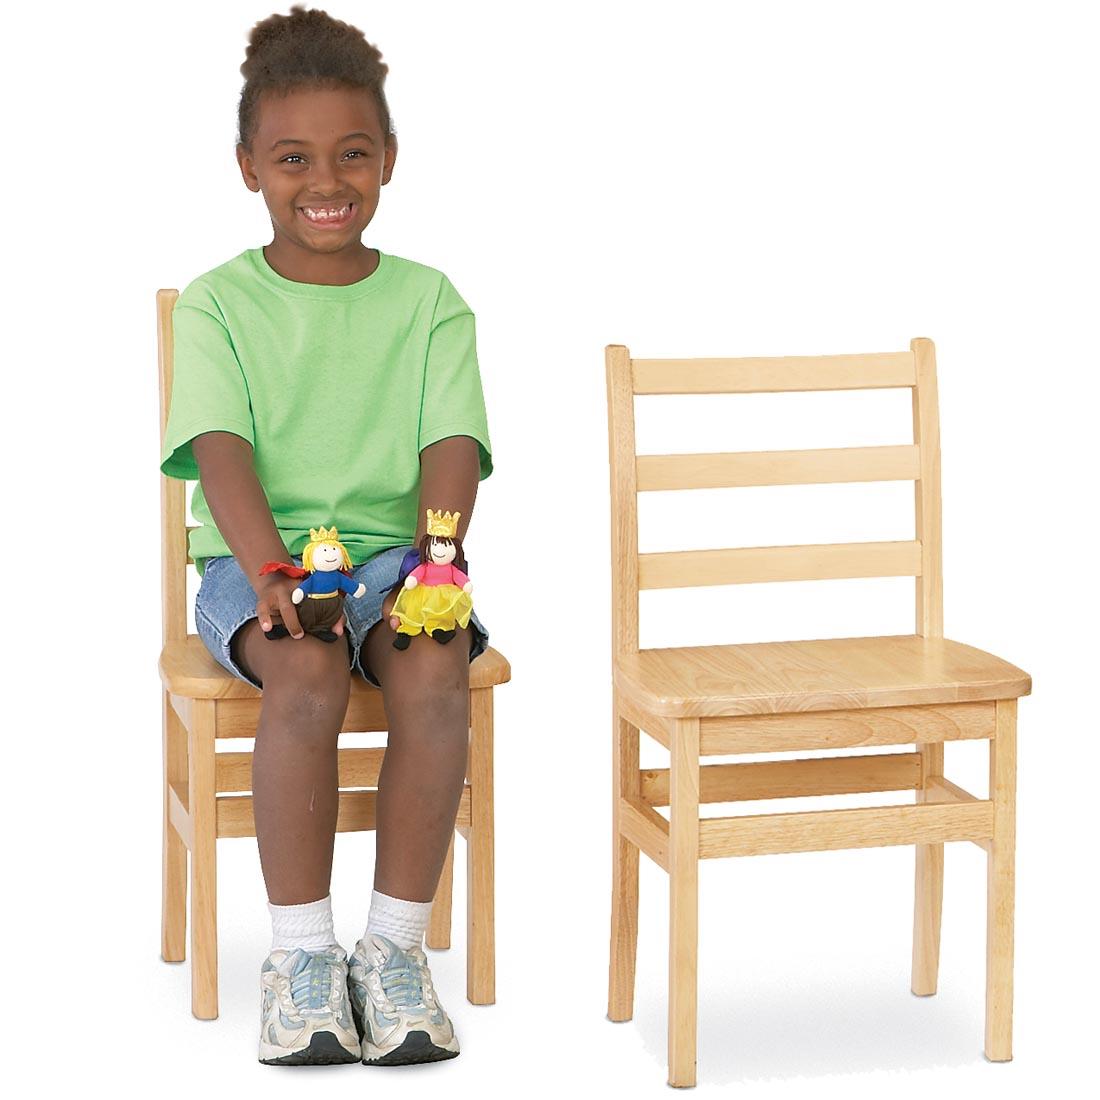 Child sitting on a Ladderback Chair with an empty one beside